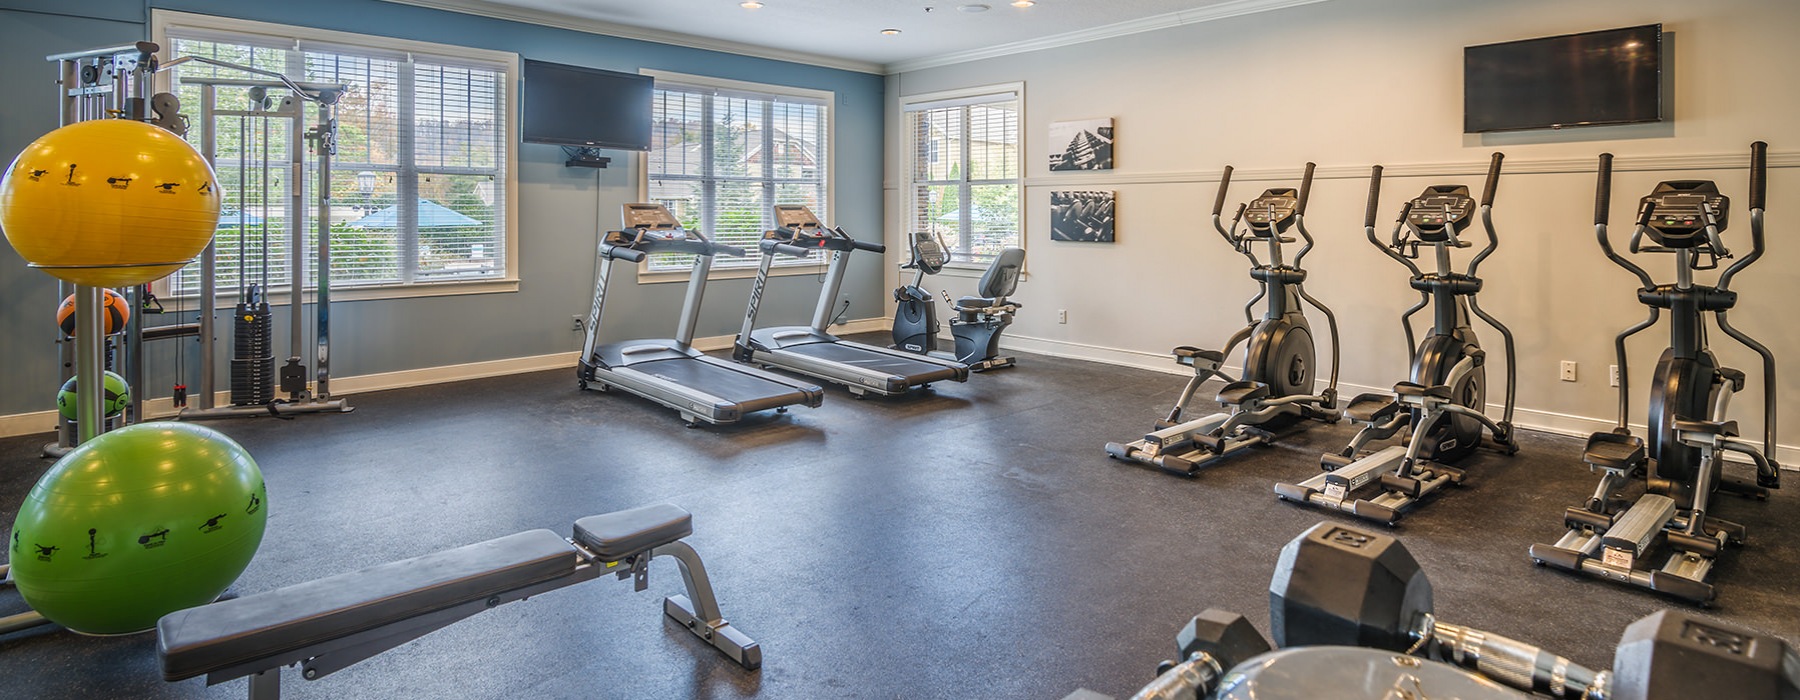 Open space gym with treadmills, ellipticals, and exercise balls